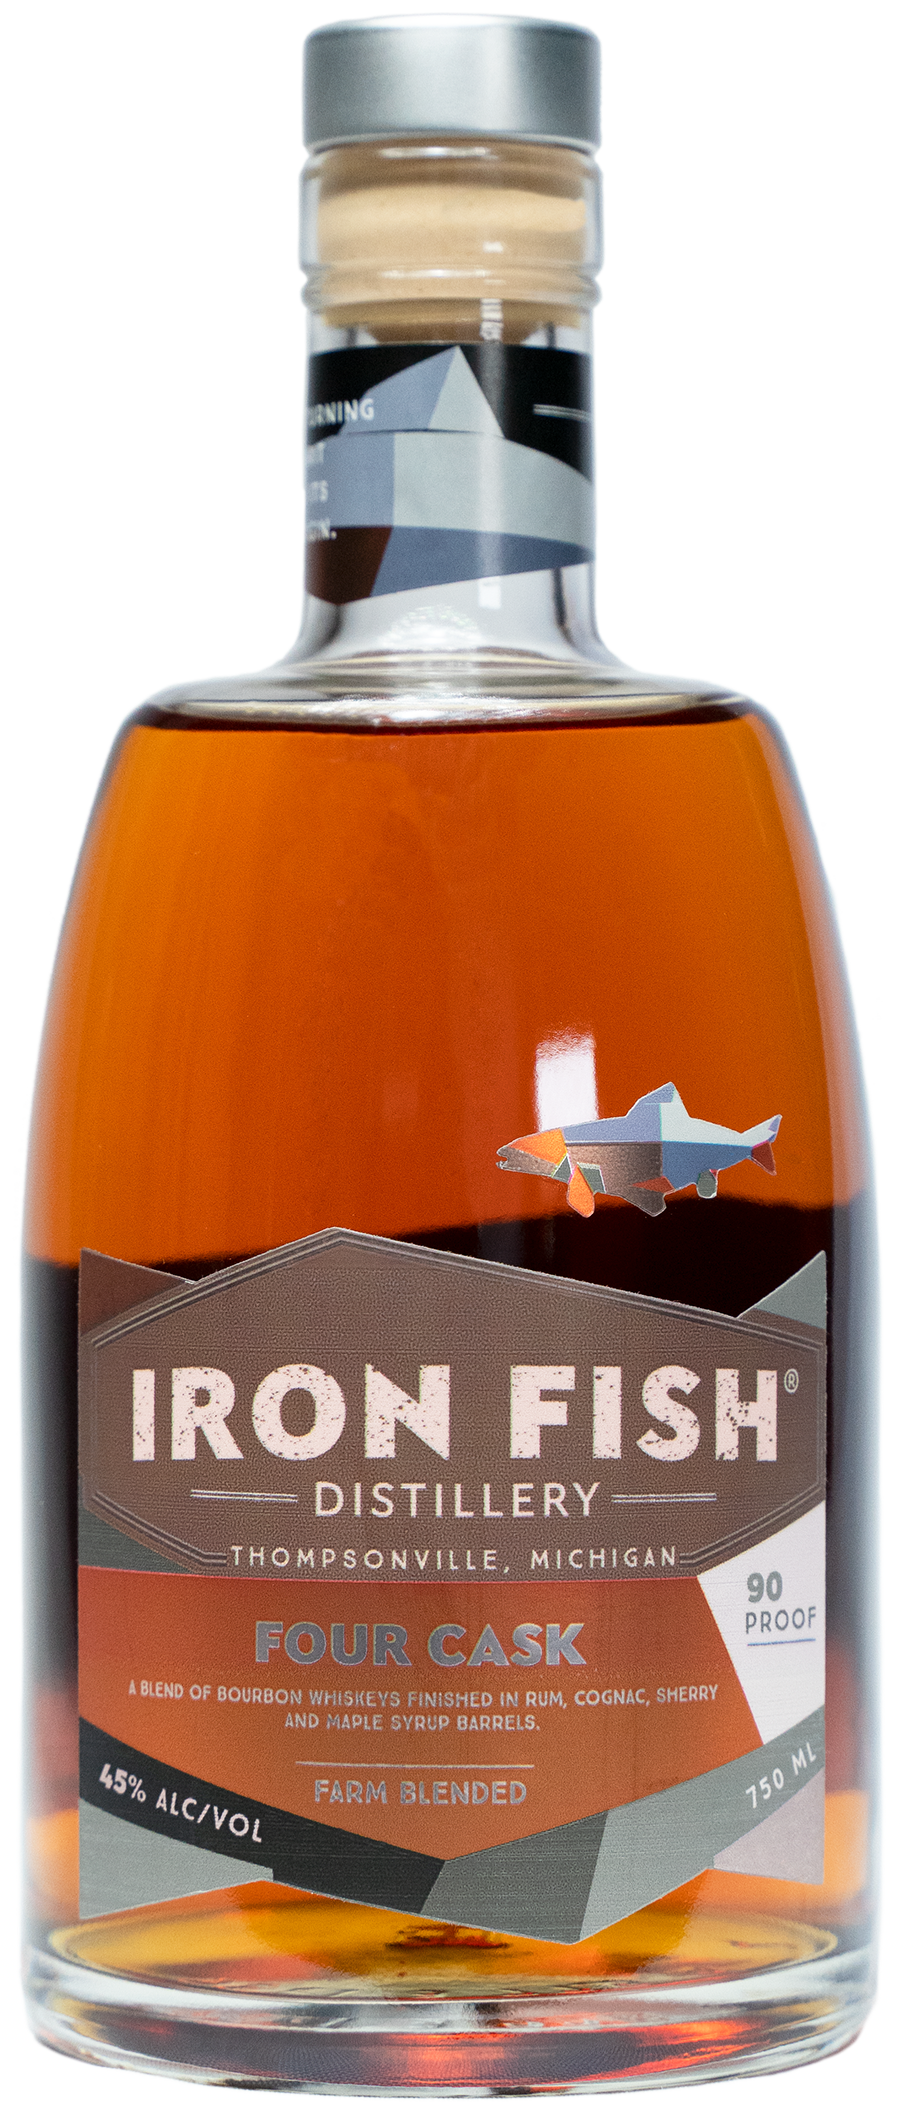 Iron Fish Four Cask Whiskey - A Blend of Bourbon Whiskies